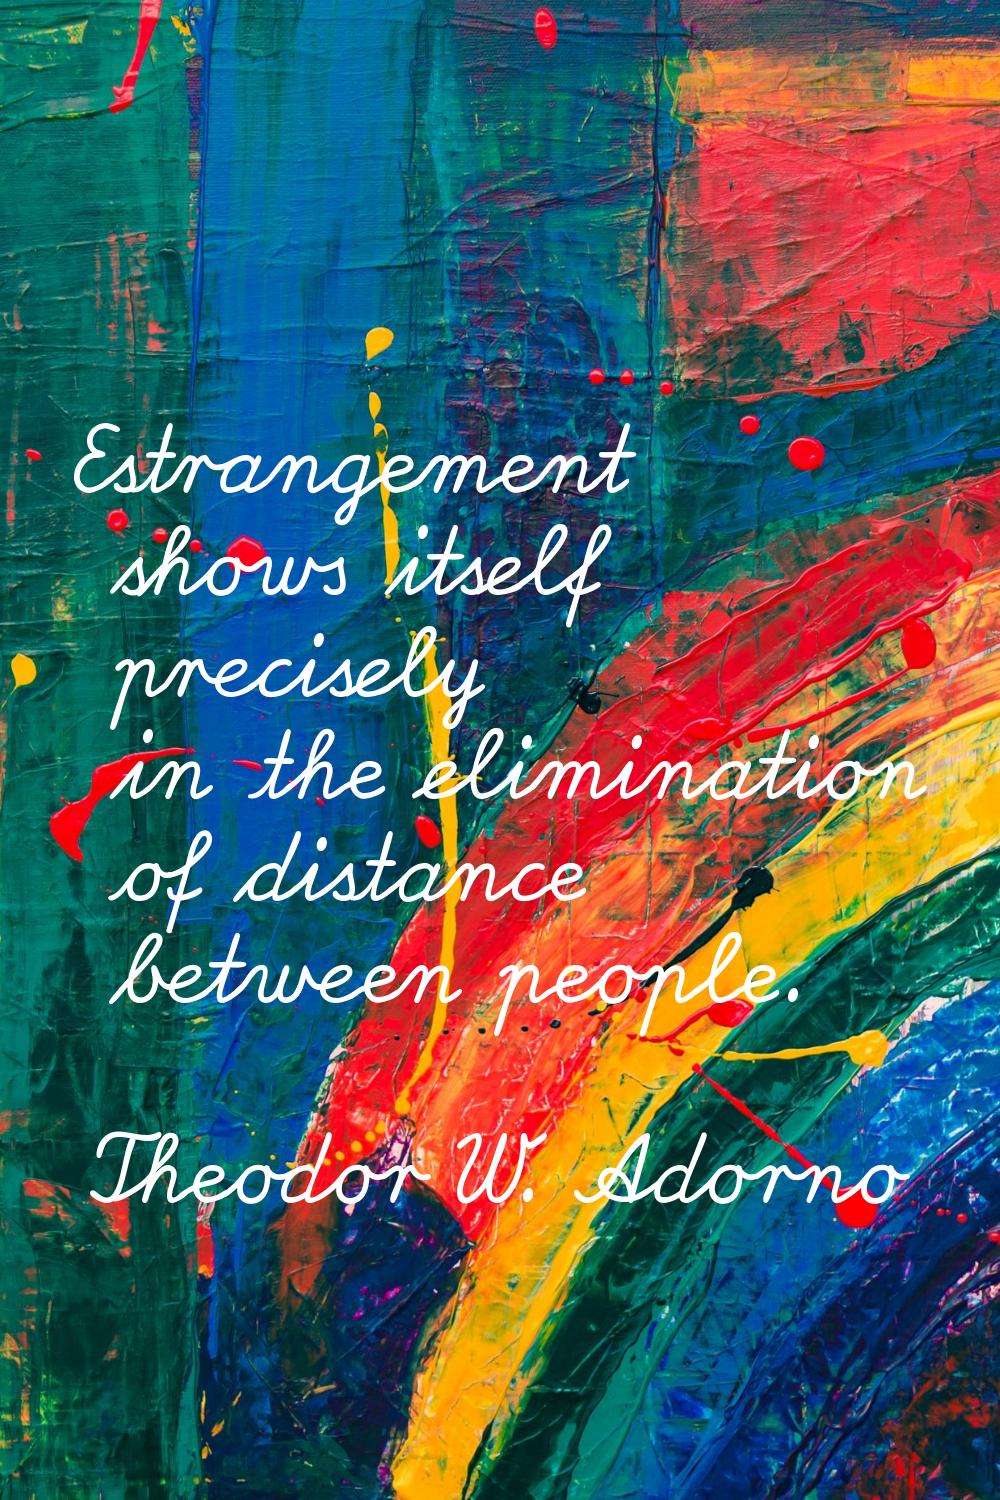 Estrangement shows itself precisely in the elimination of distance between people.